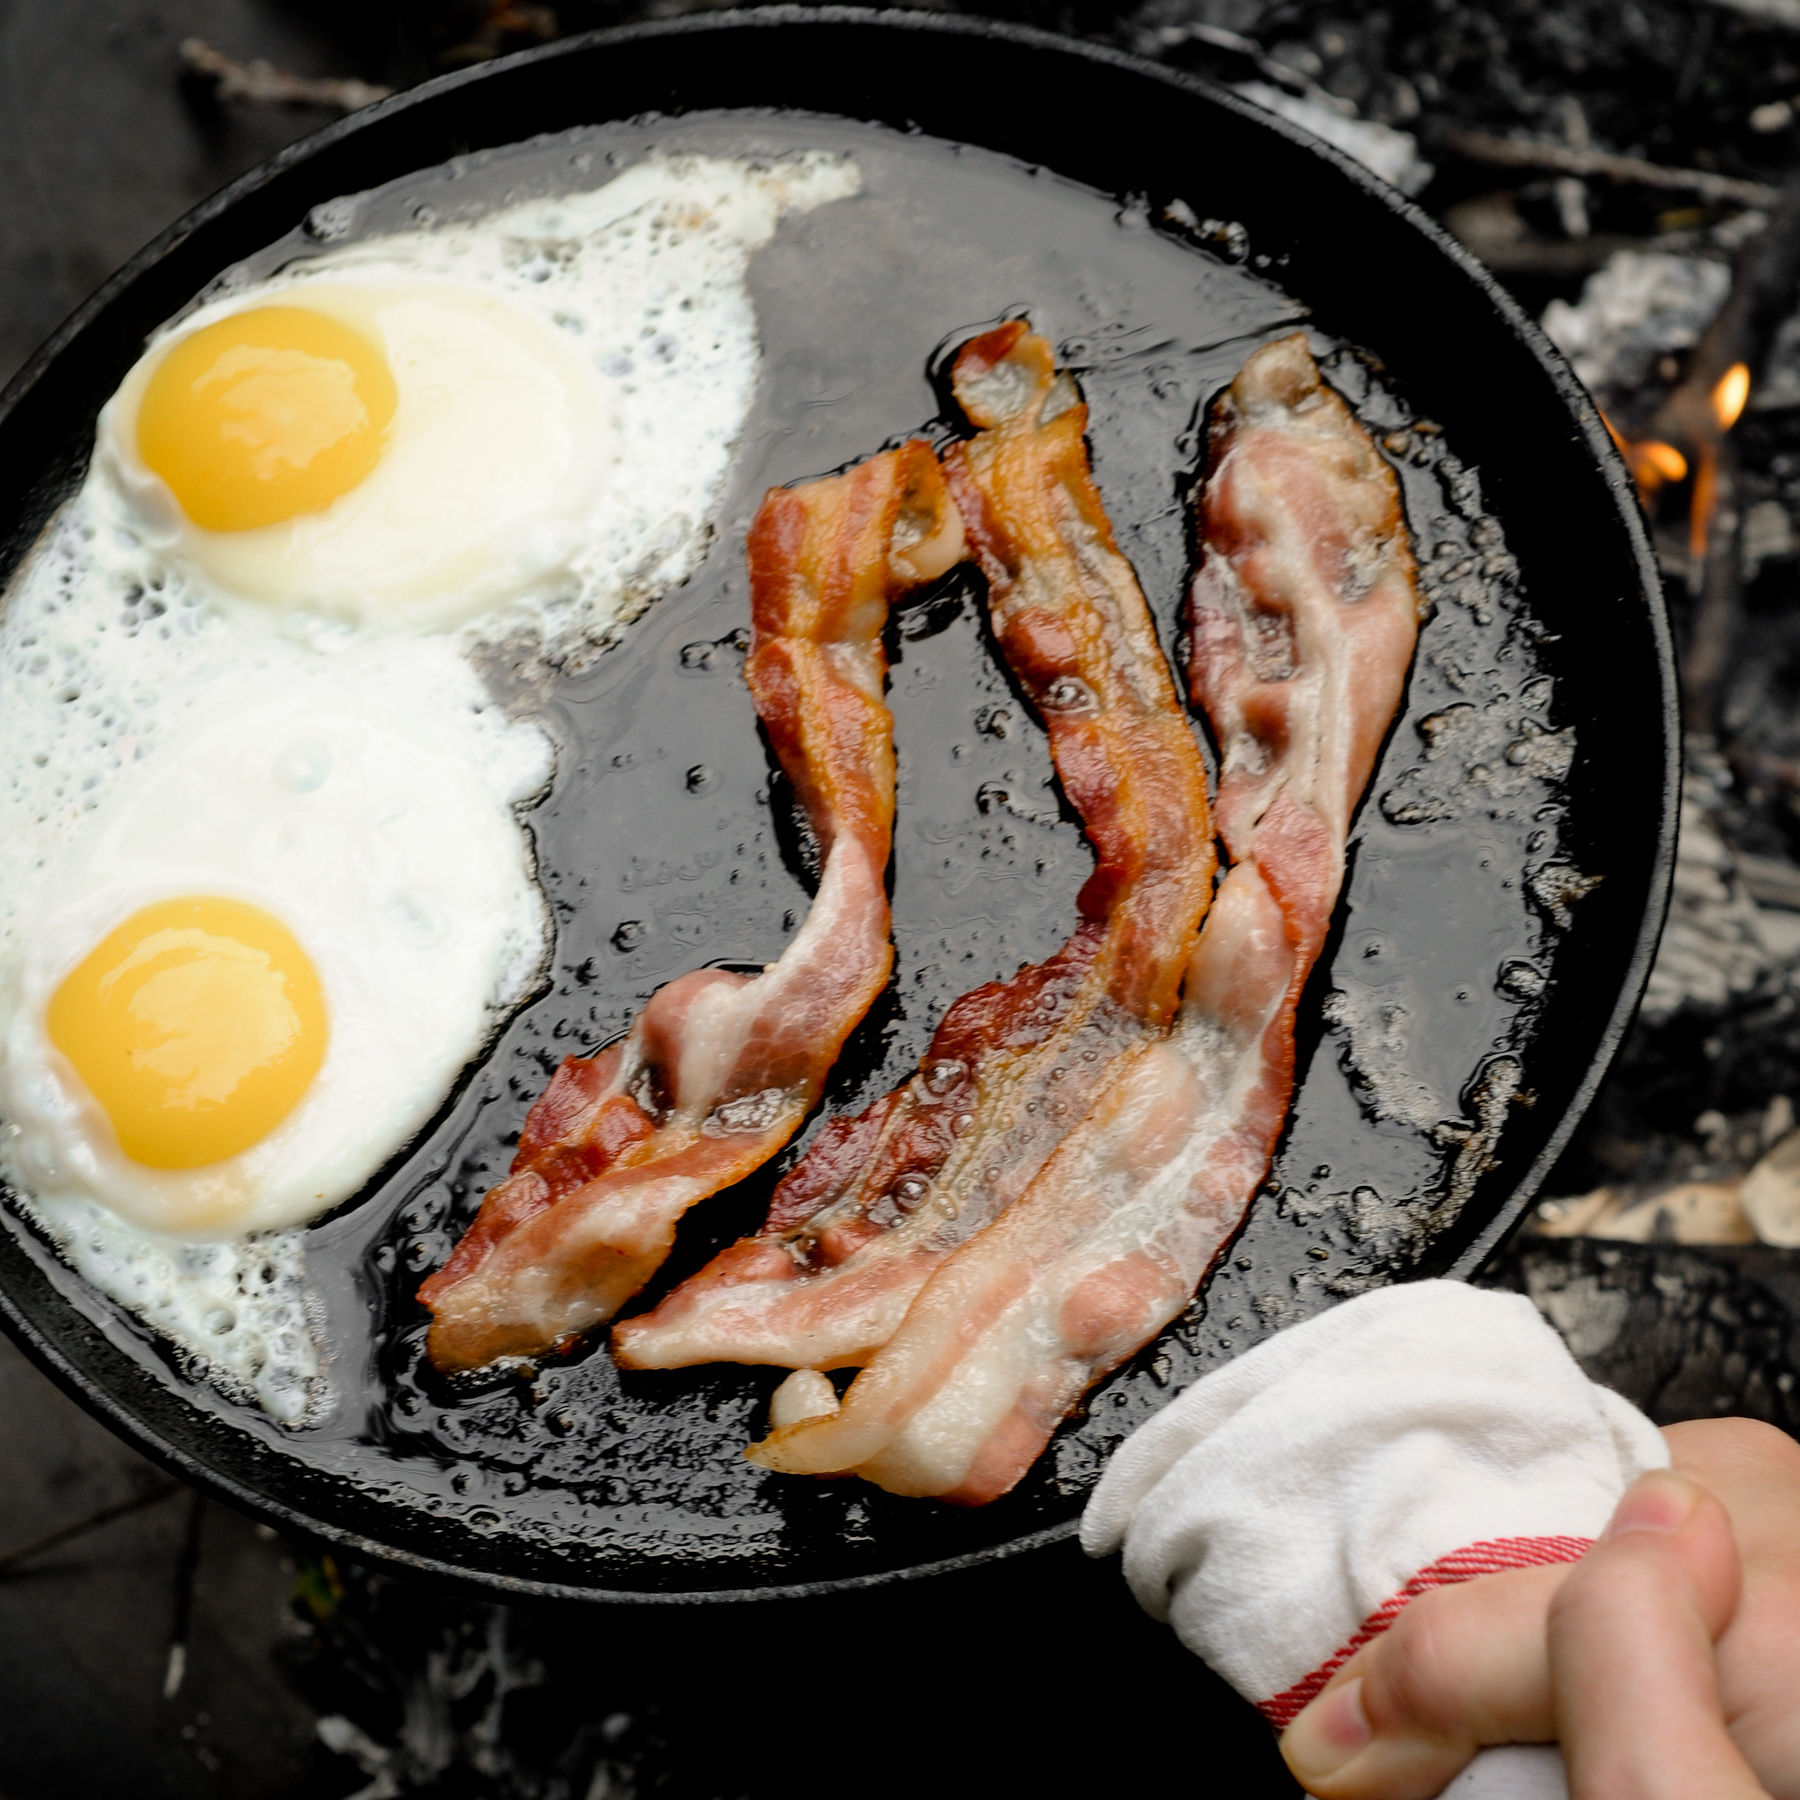 campfire-grub-eggs-and-bacon-skillet-campfire-cooking